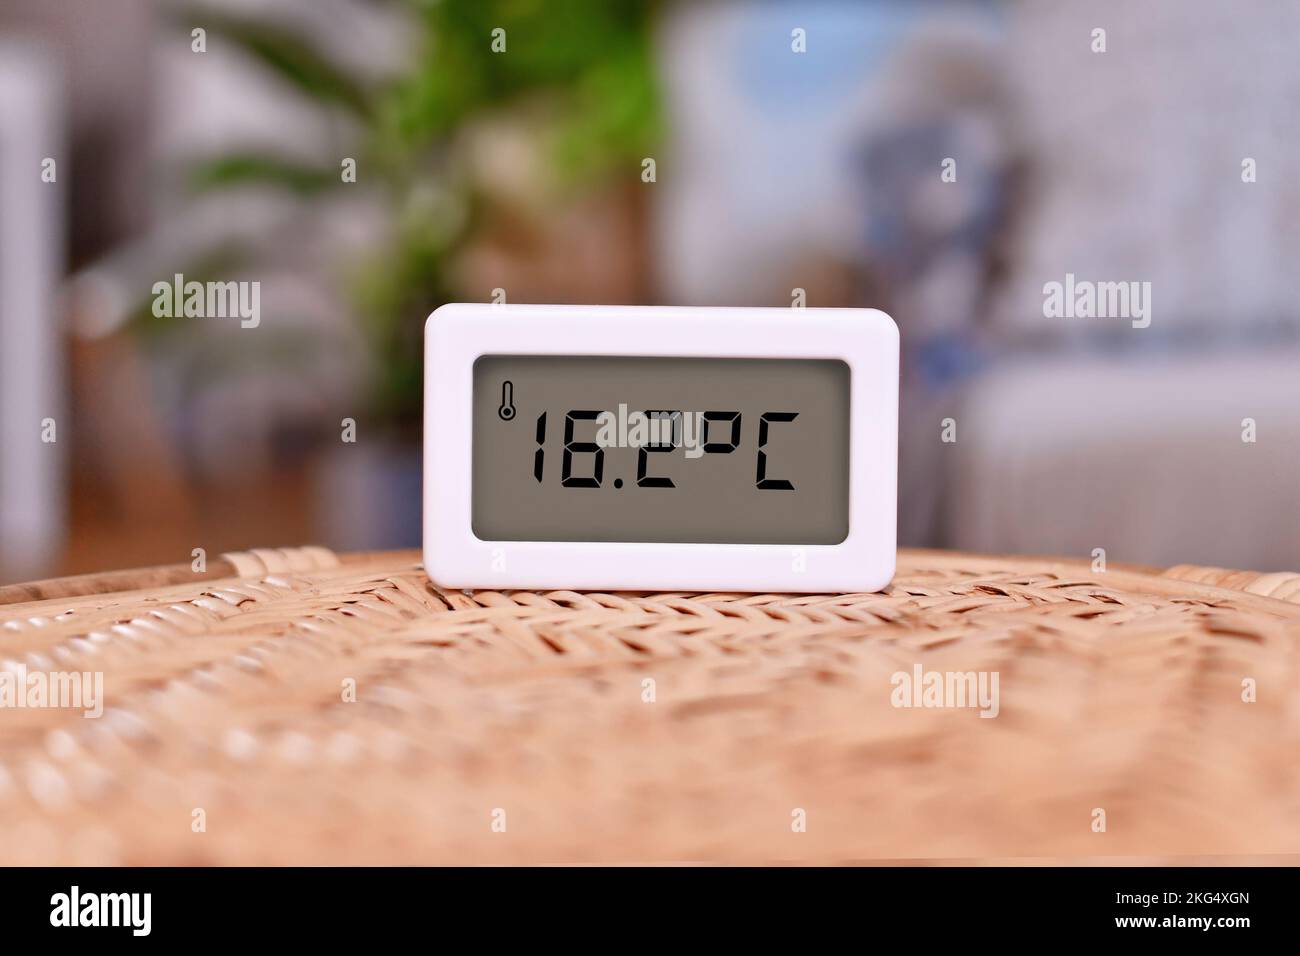 Digital thermometer showing cold room temperature of 16.7 degree Celsius Stock Photo